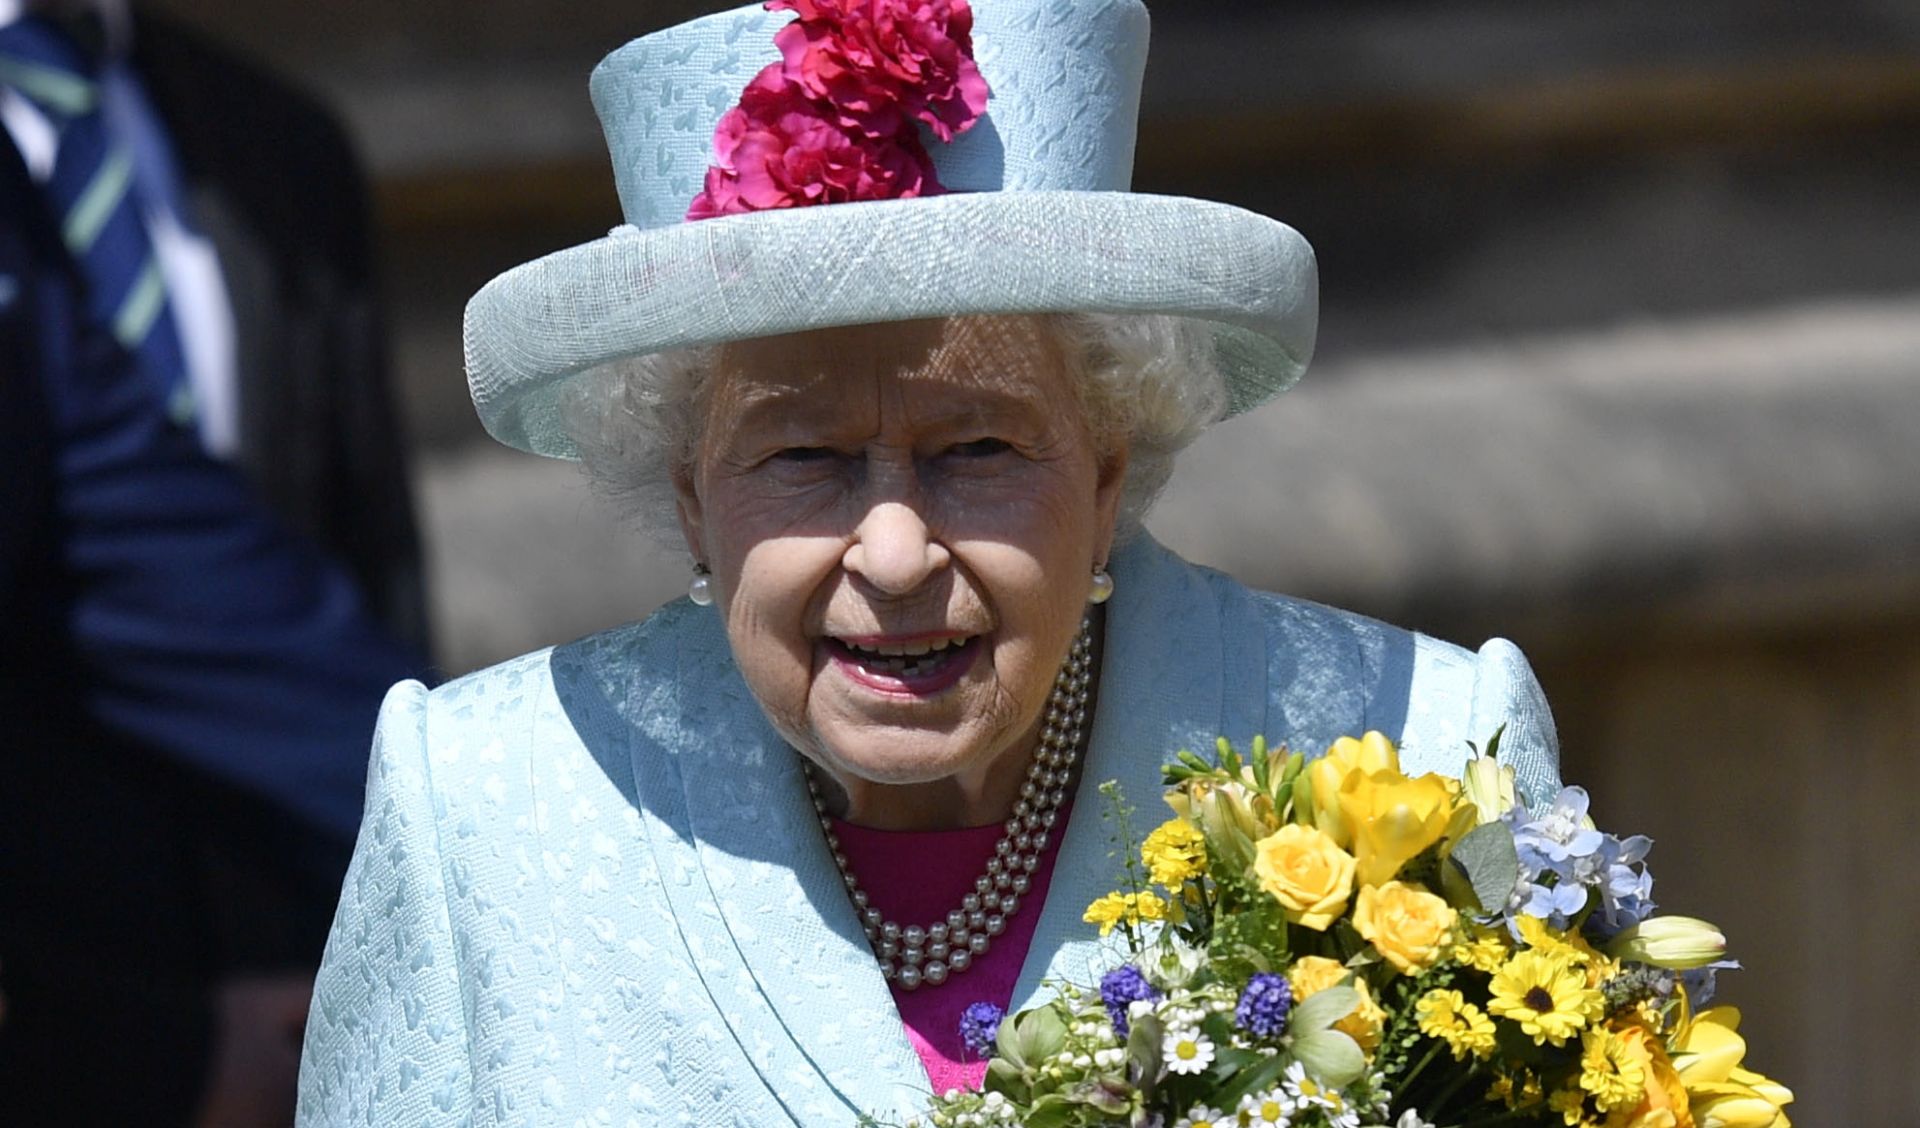 epa07519441 Britain's Queen Elizabeth leaves the annual Easter Sunday Service at St Georges Chapel in Windsor Castle, Britain, 21 April 2019. The Easter Mattins Service is attended every year by the Royal Family. This year the service falls on the Queen's Elizabeth II birthday, who turns 93.  EPA/NEIL HALL